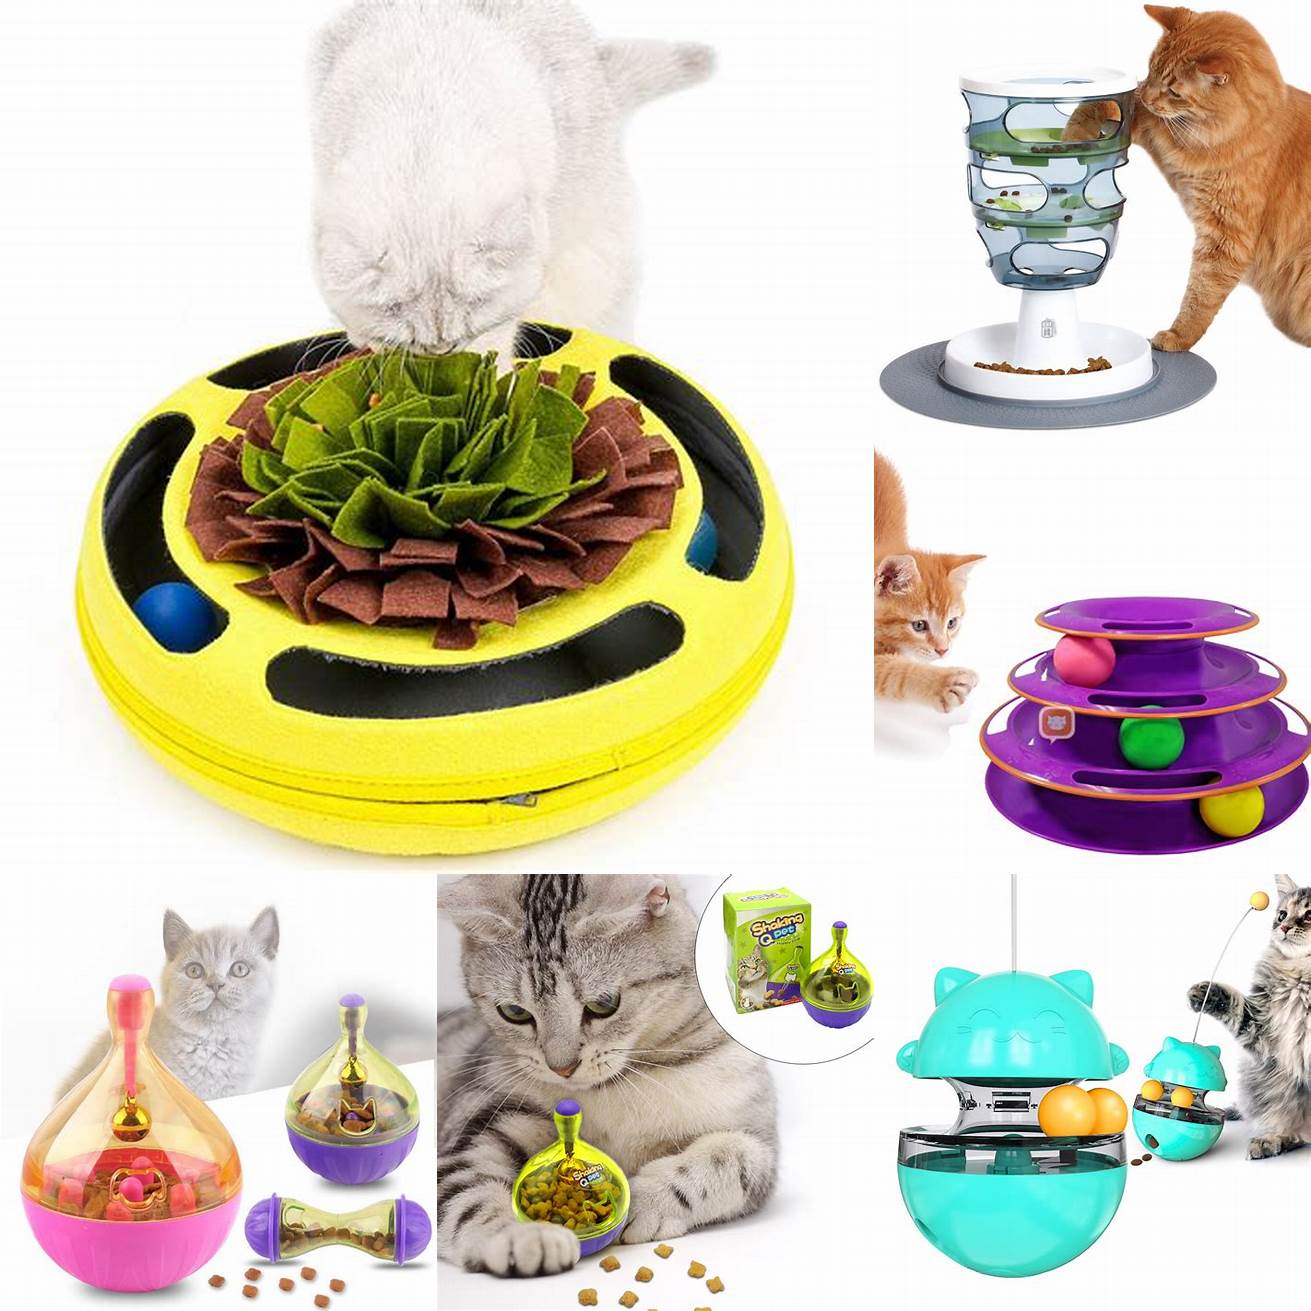 Interactive feeding toys These toys require cats to work for their food which can slow down their eating and provide mental stimulation